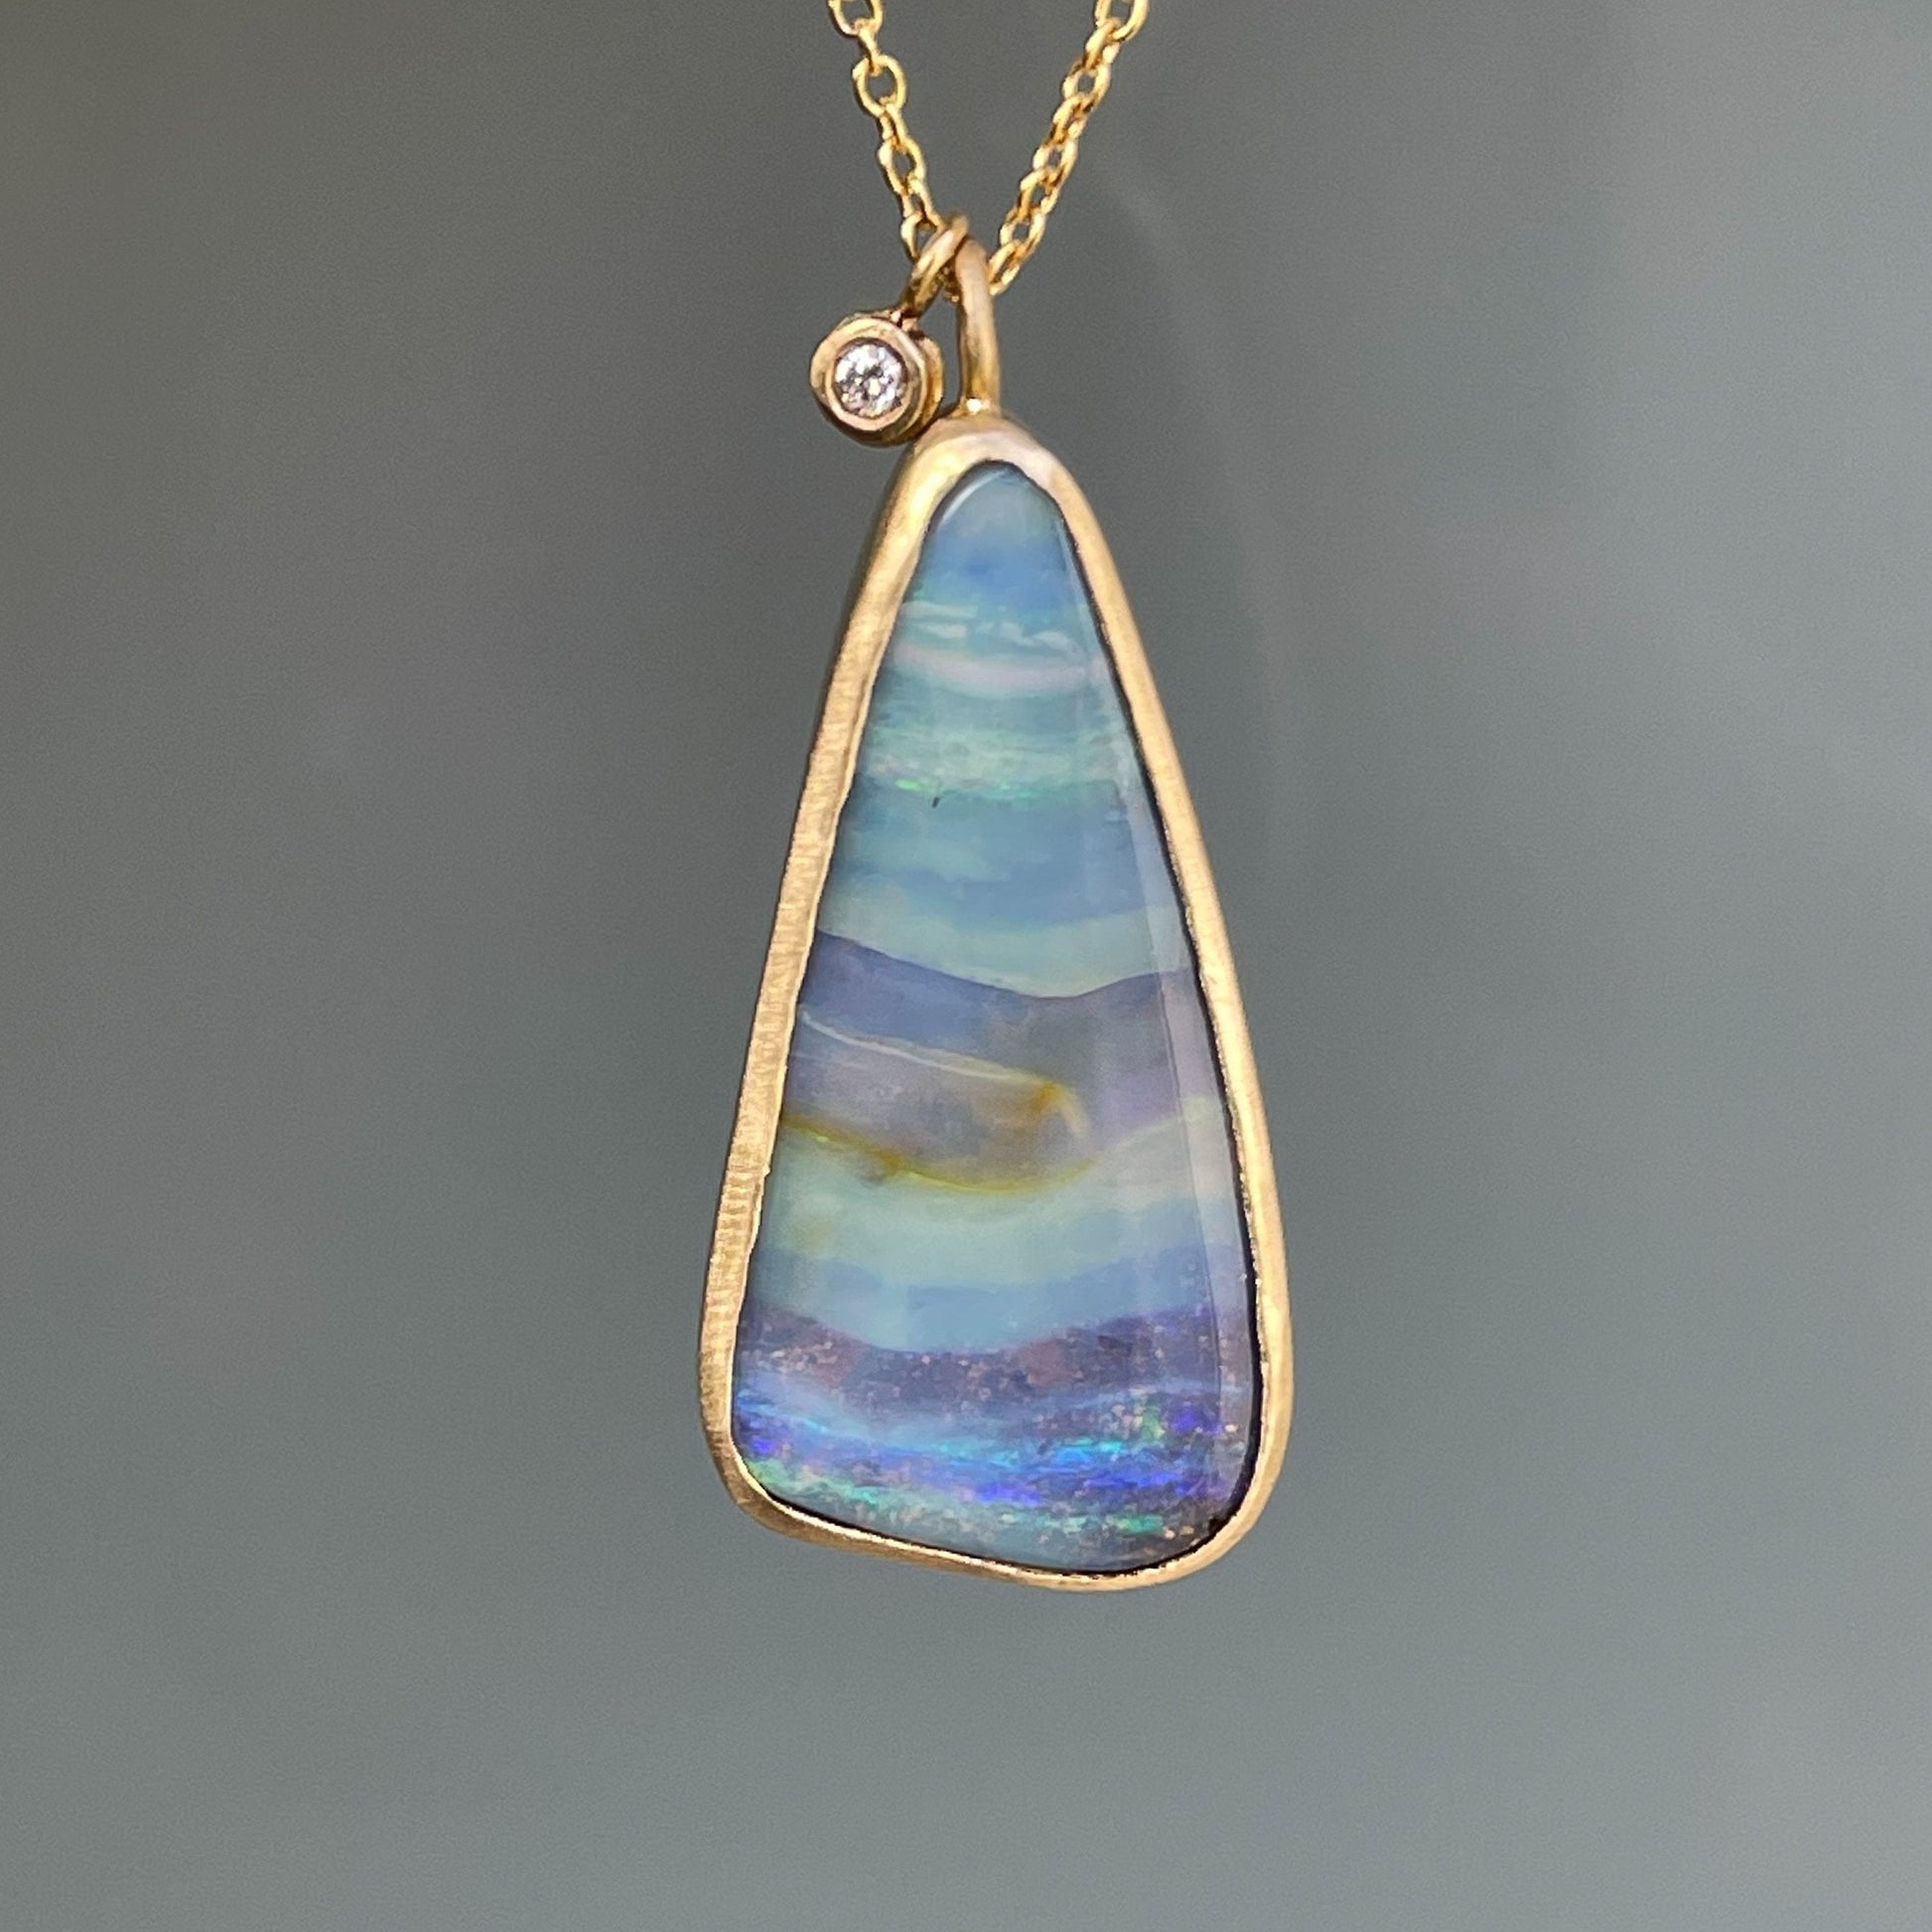 Opal pendant with boulder opal and matte gold by NIXIN Jewelry shown in shade